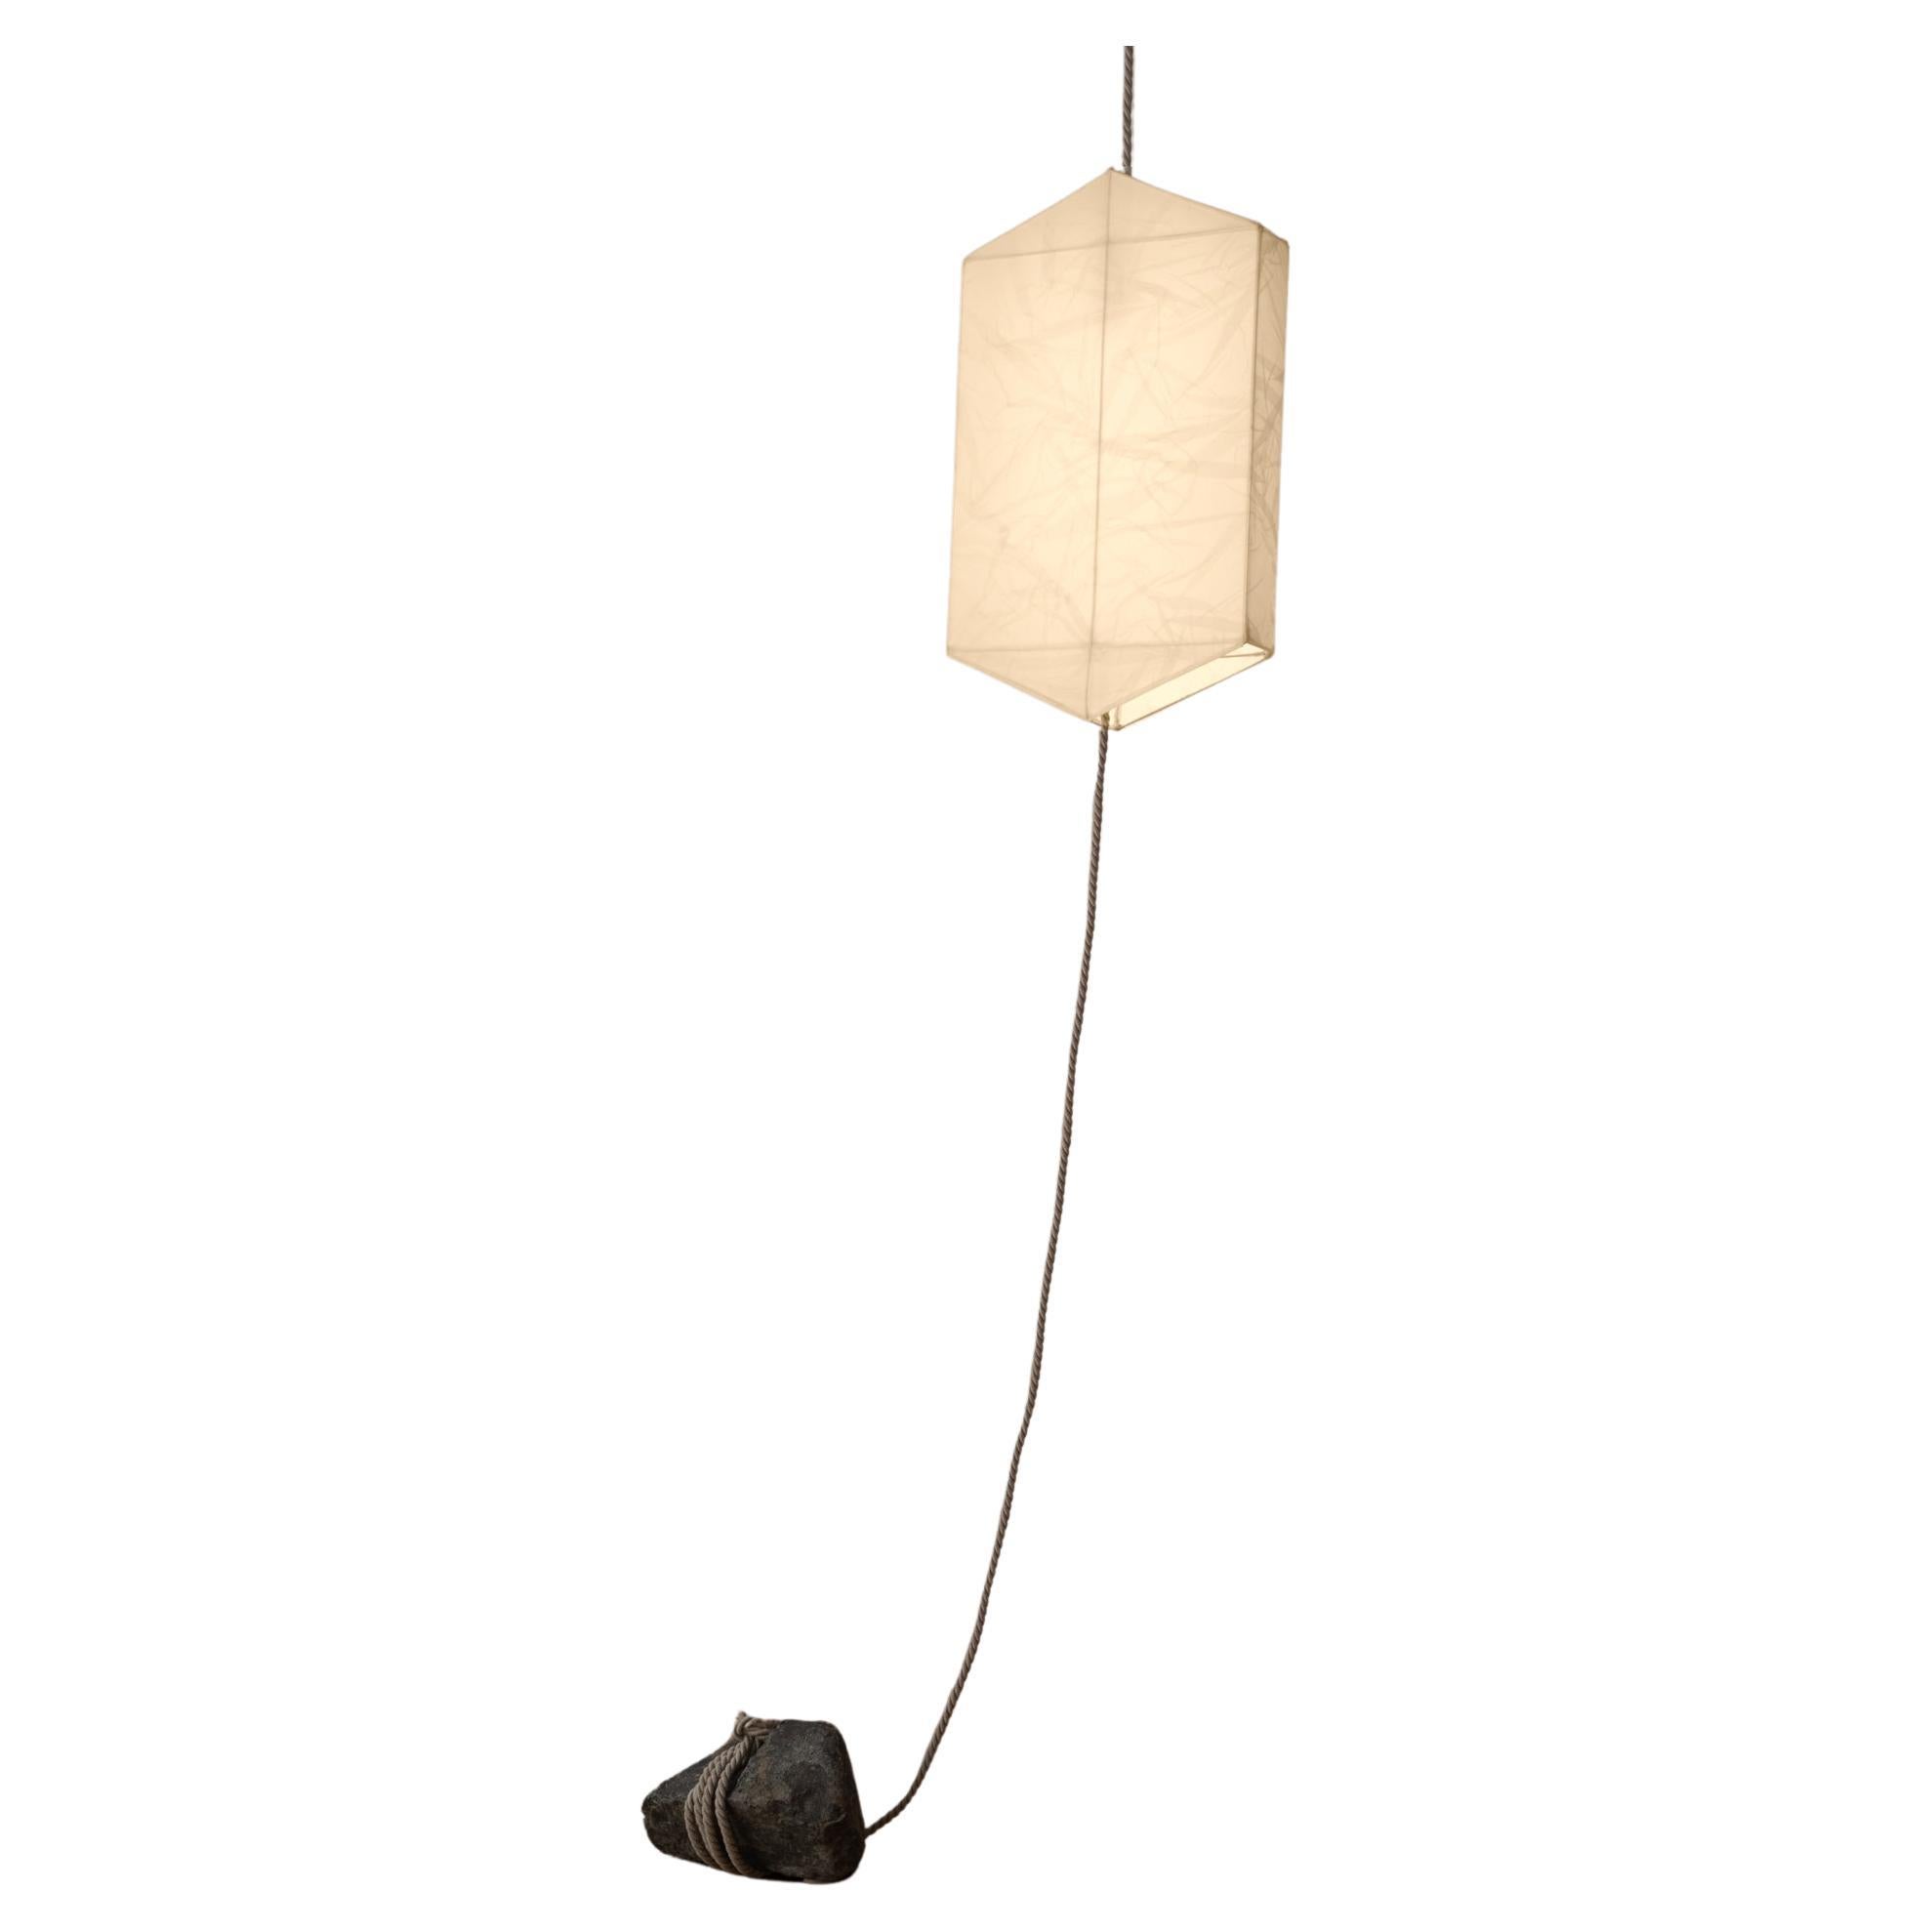 One-of-a-Kind Hanging Lantern-style Lamp of Silk Organza, Rope and Raw Stone For Sale